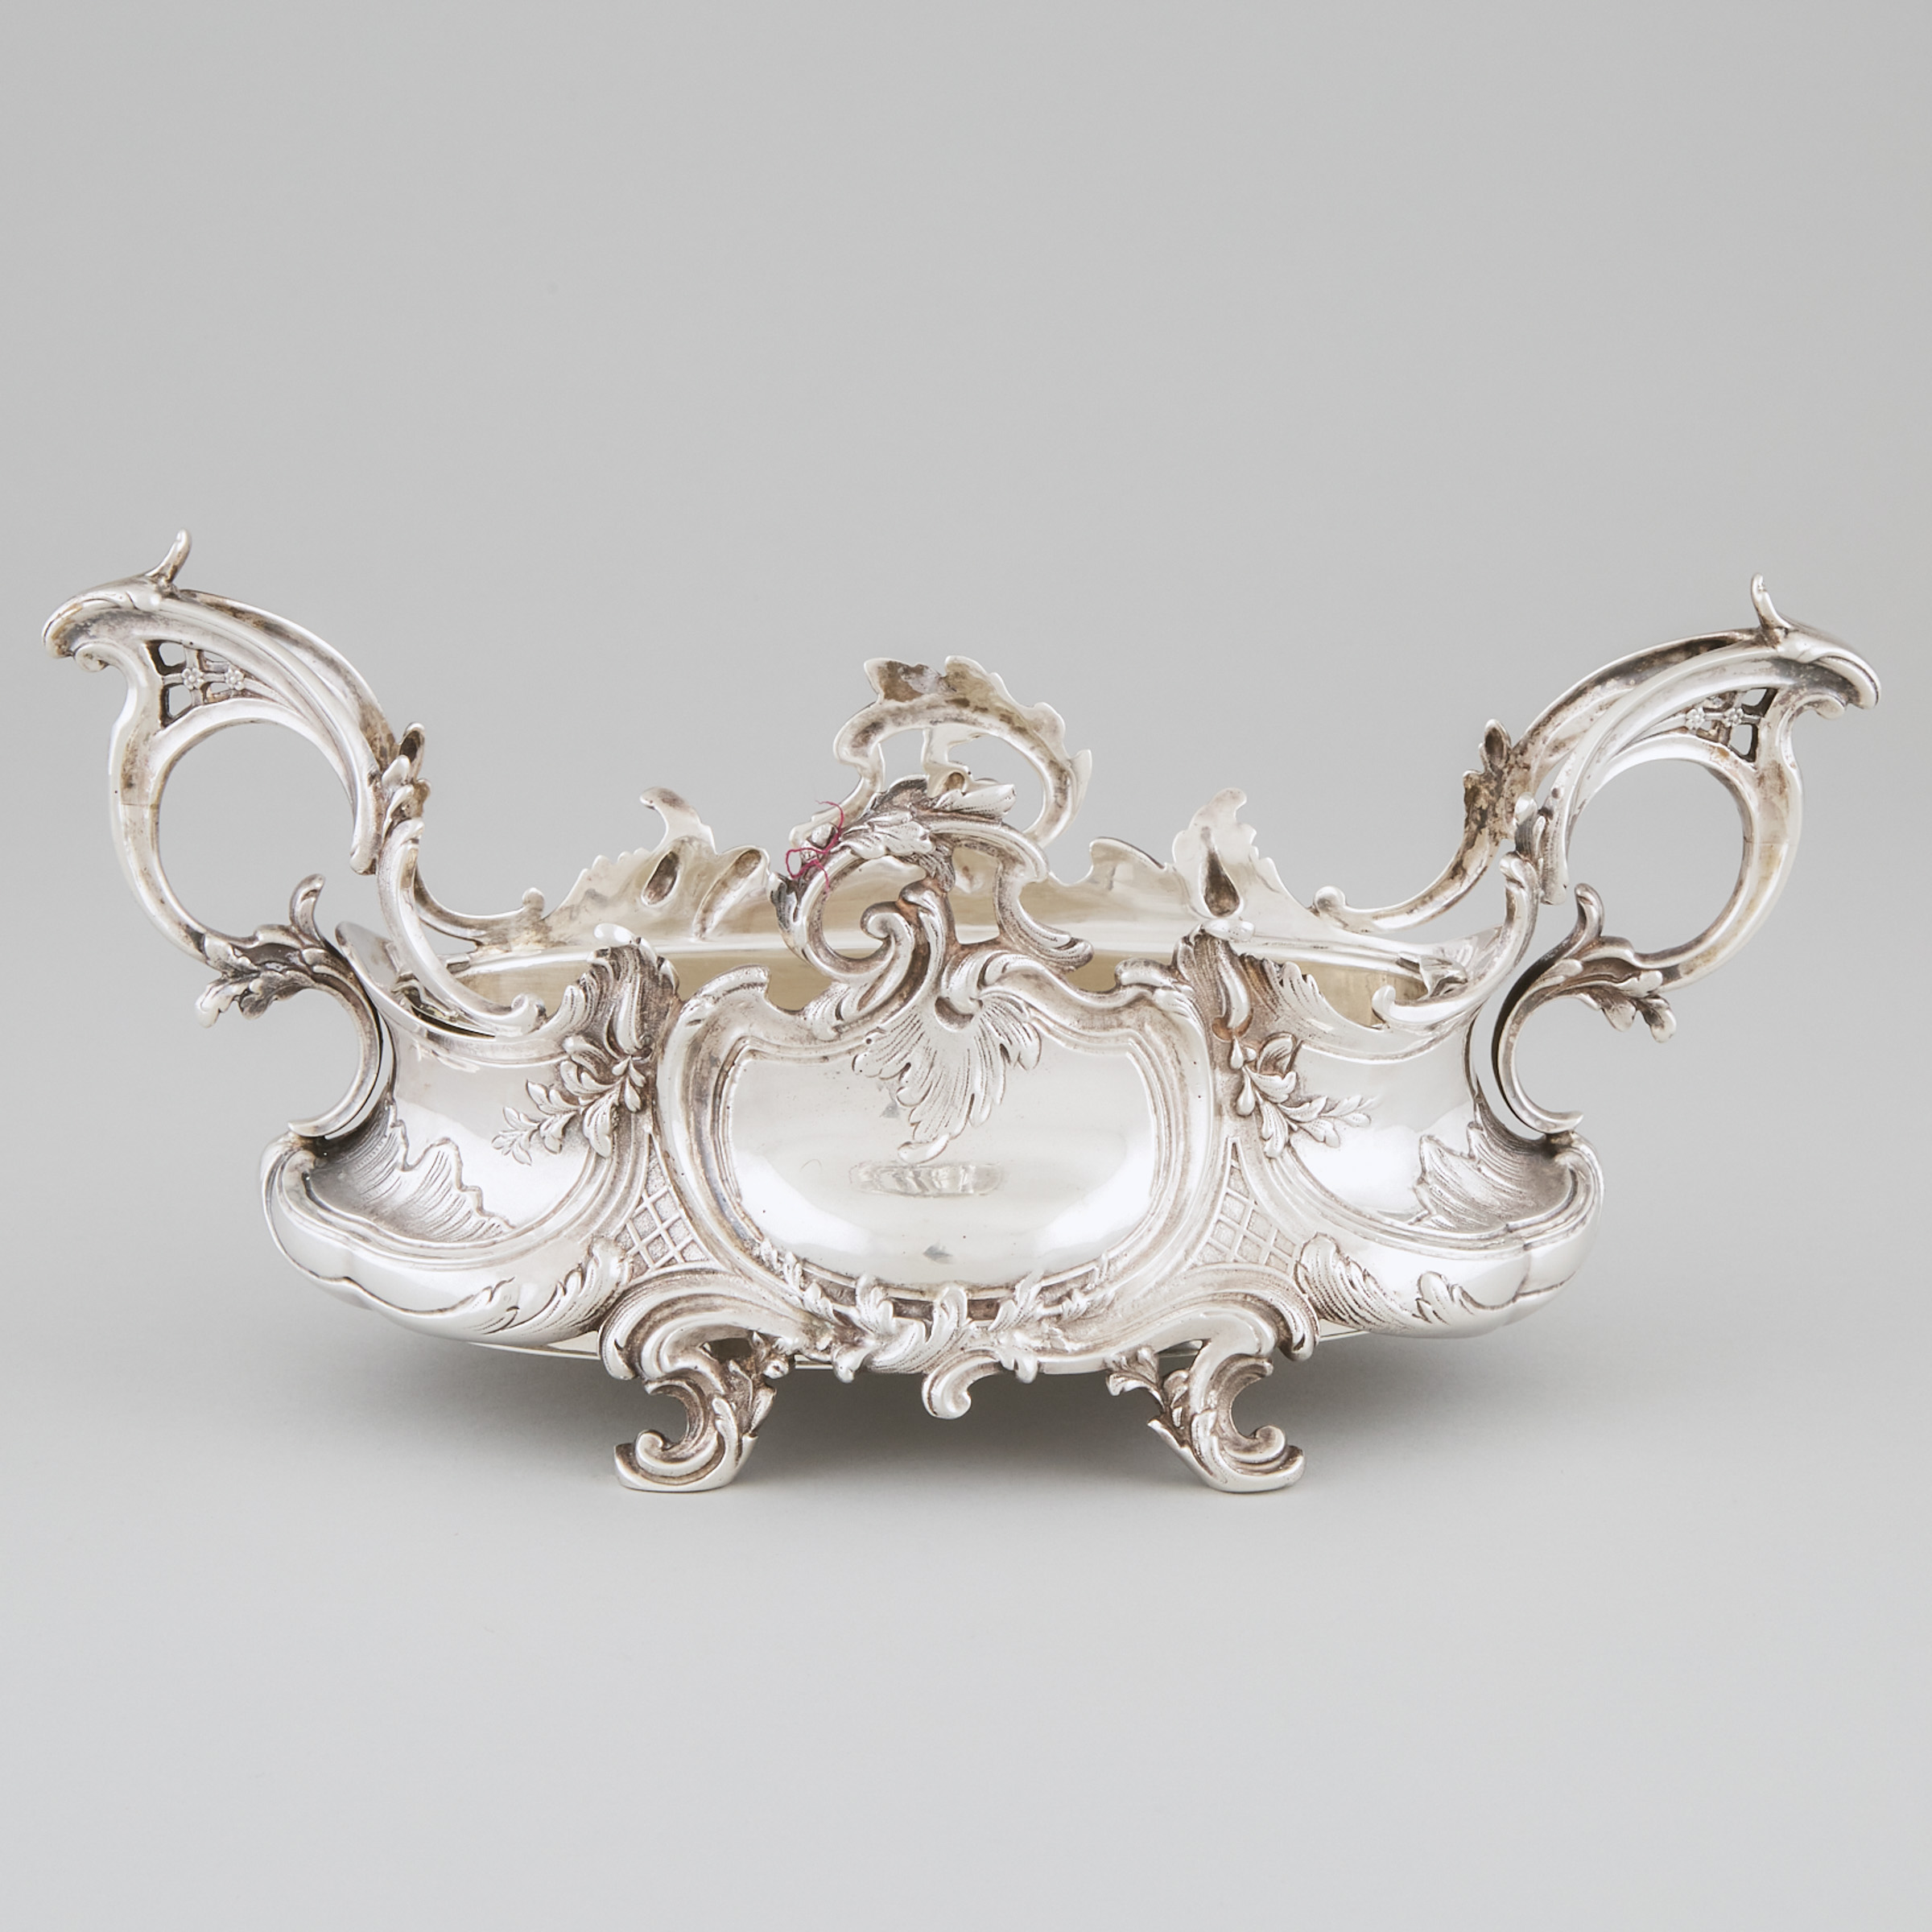 Continental Silver Two-Handled Oval Centrepiece, early 20th century